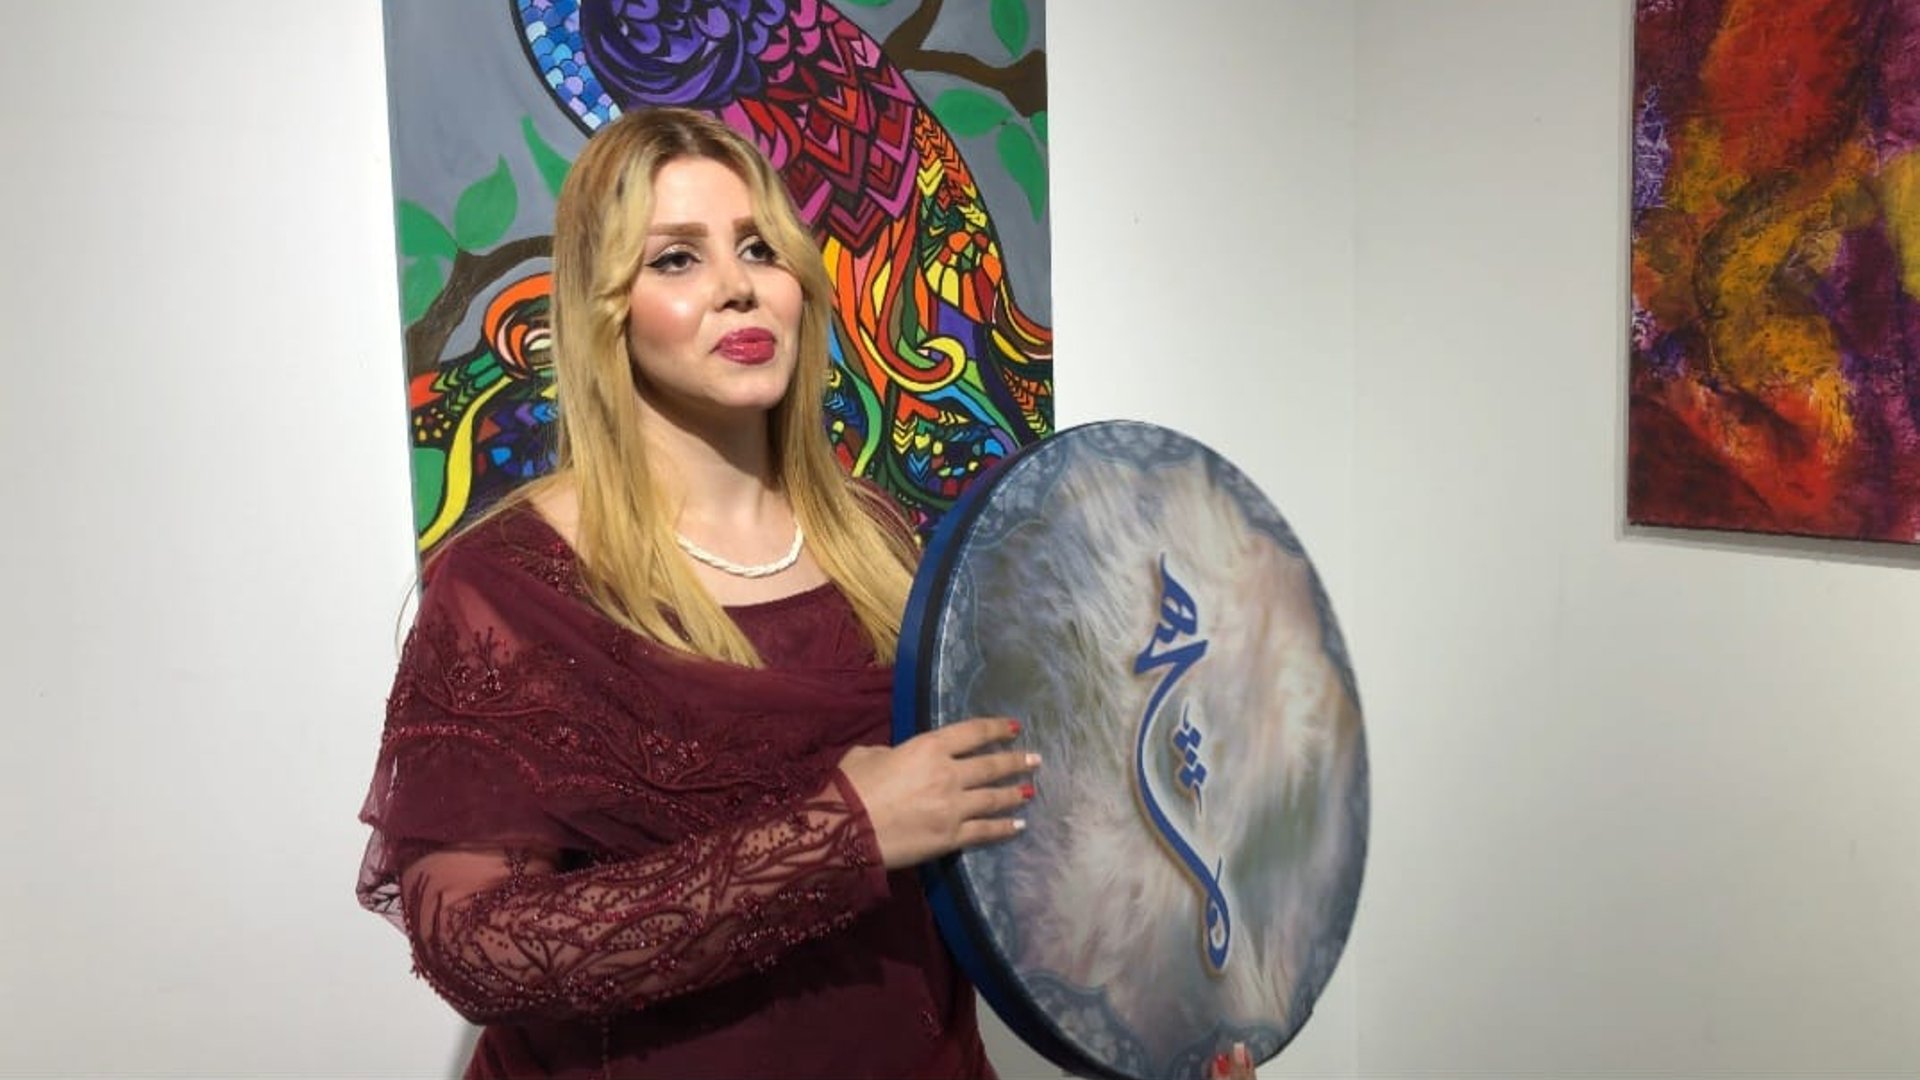 Video Meet Jina Khulqi as she plays the daf at a womens art exhibition